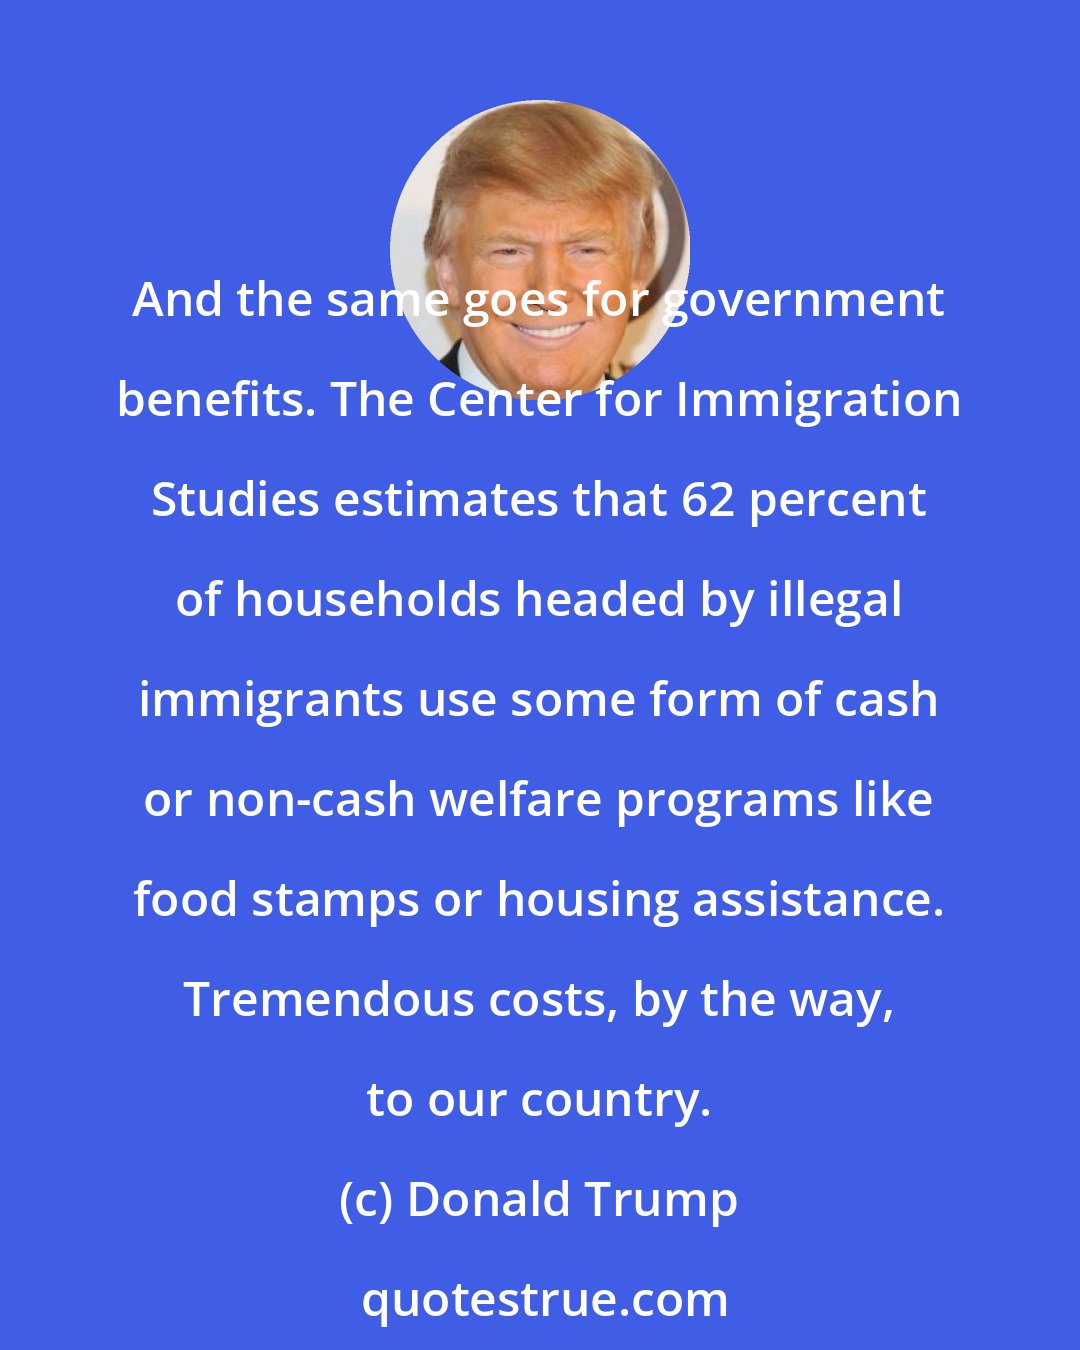 Donald Trump: And the same goes for government benefits. The Center for Immigration Studies estimates that 62 percent of households headed by illegal immigrants use some form of cash or non-cash welfare programs like food stamps or housing assistance. Tremendous costs, by the way, to our country.